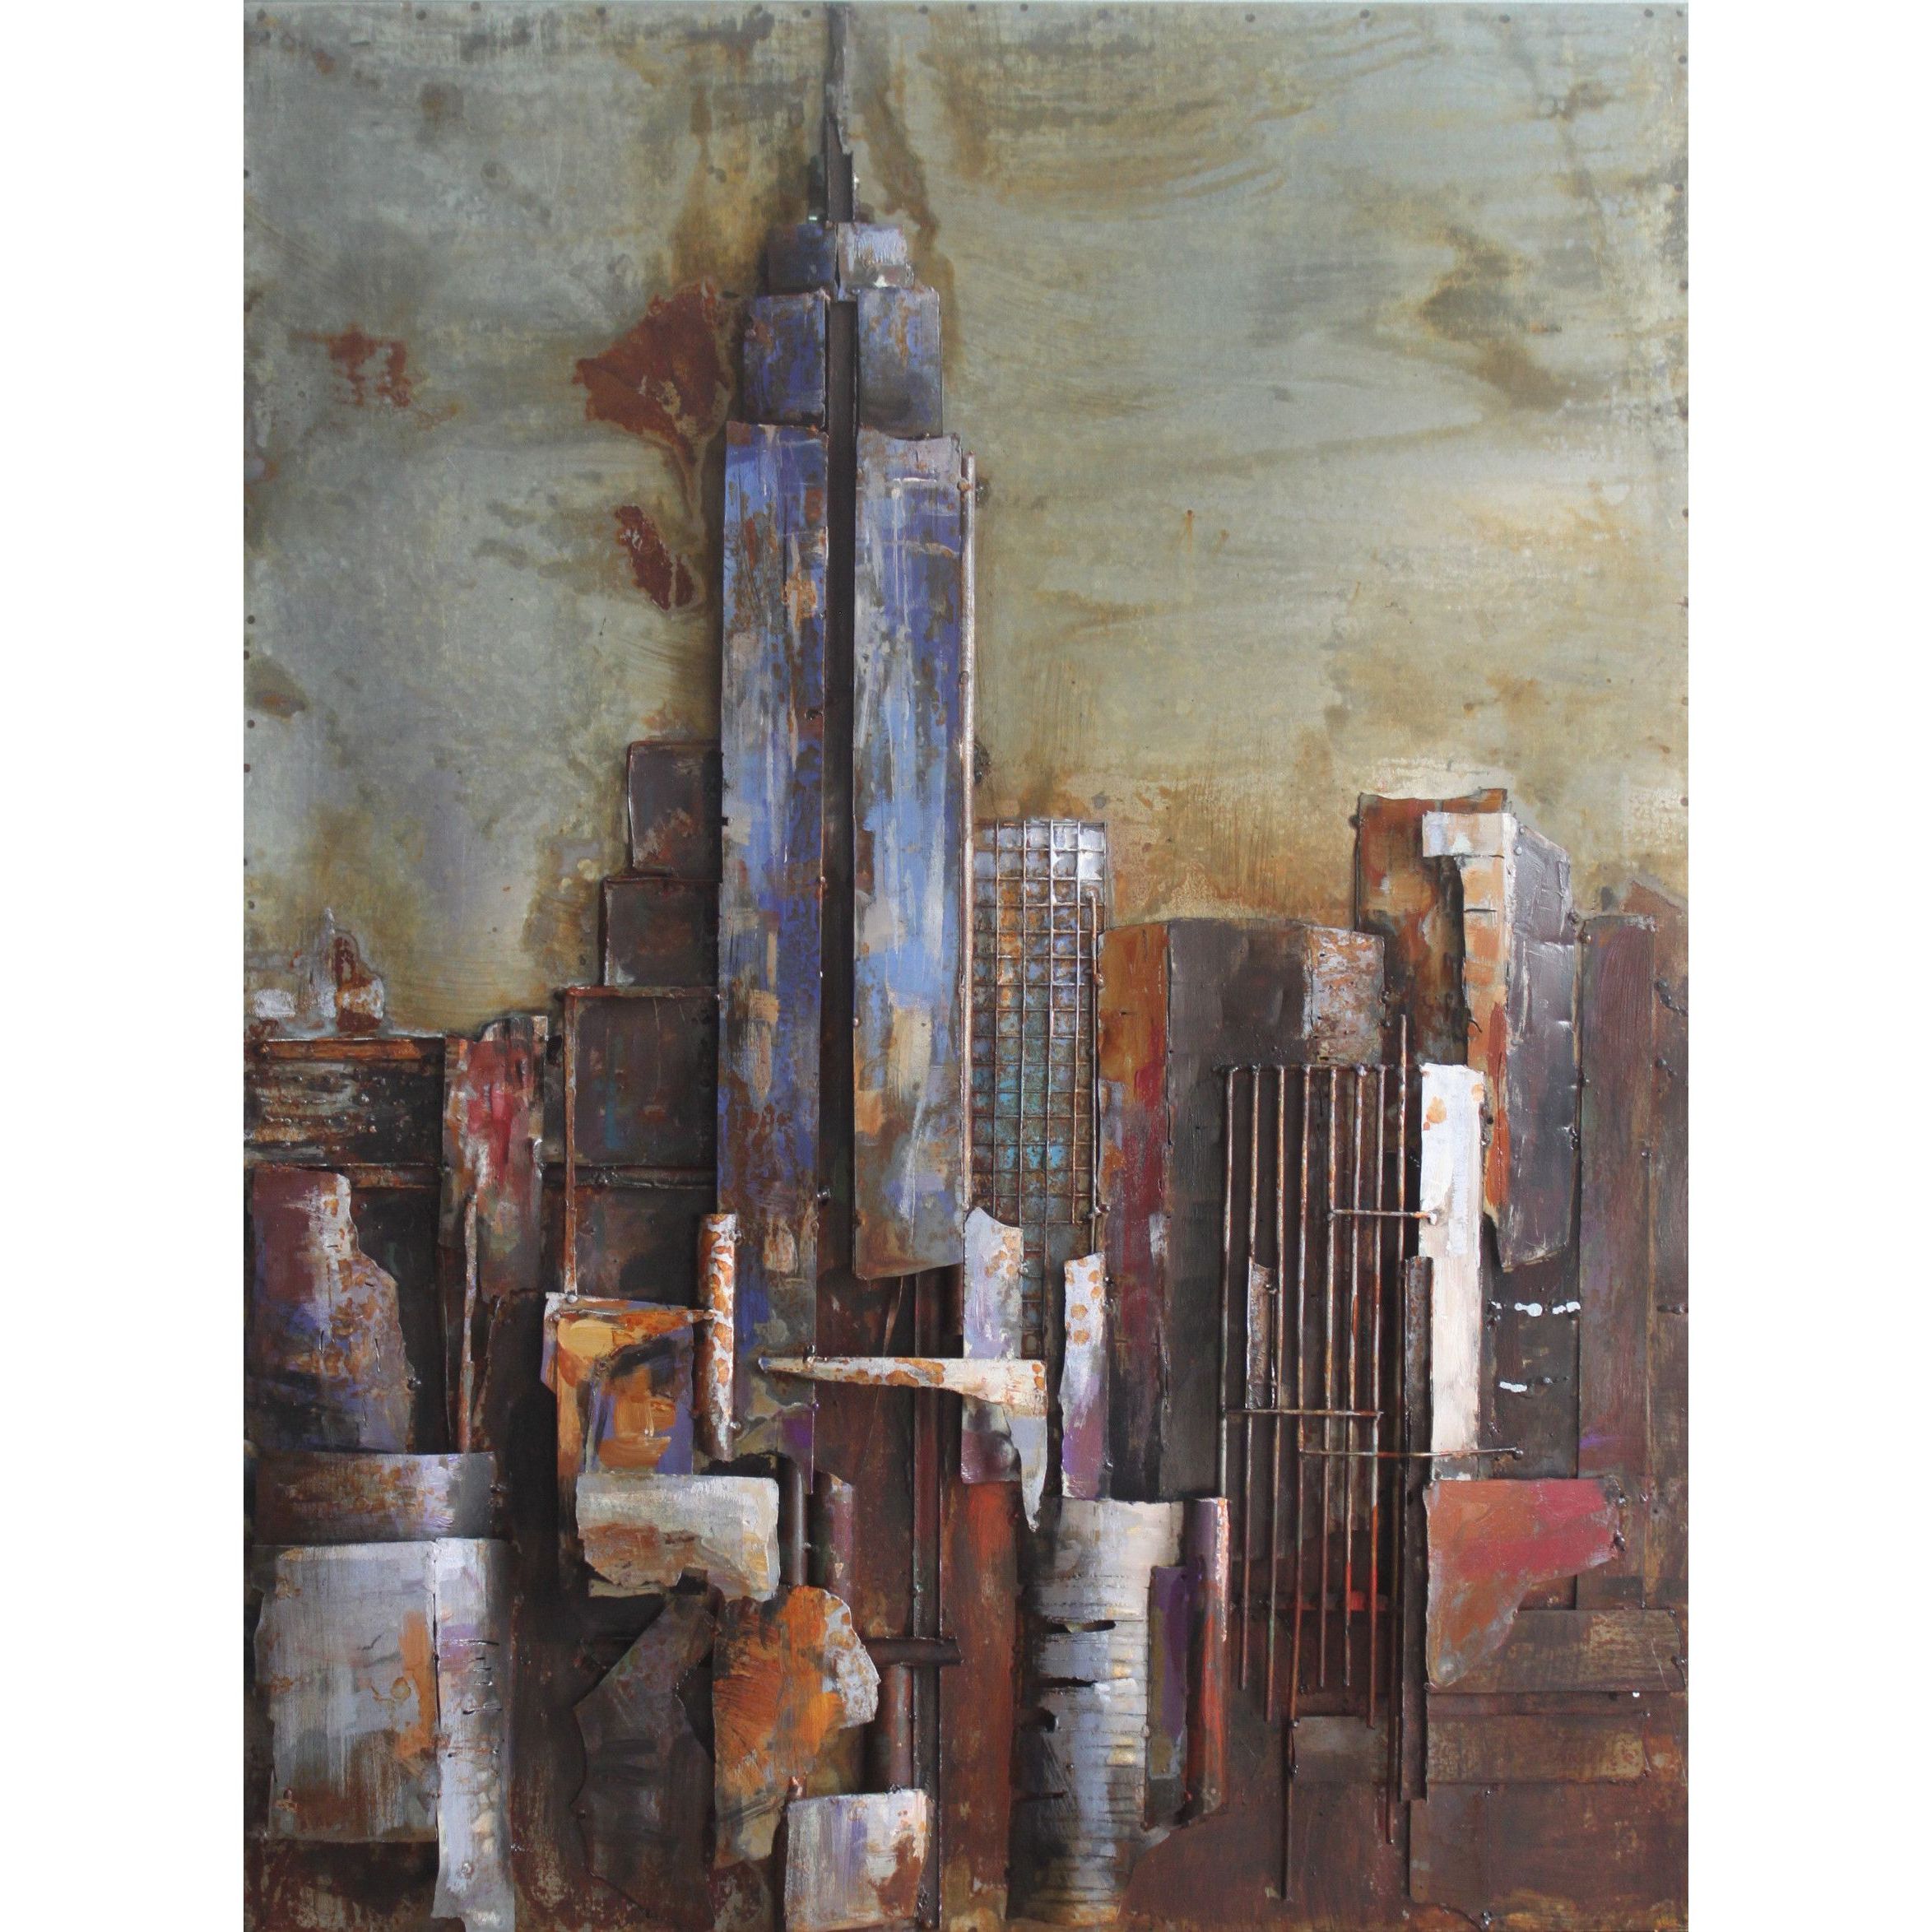 The Empire State Building" Mixed Media Iron Hand Painted Dimensional Intended For 2019 Mixed Media Iron Hand Painted Dimensional Wall Decor (View 18 of 20)